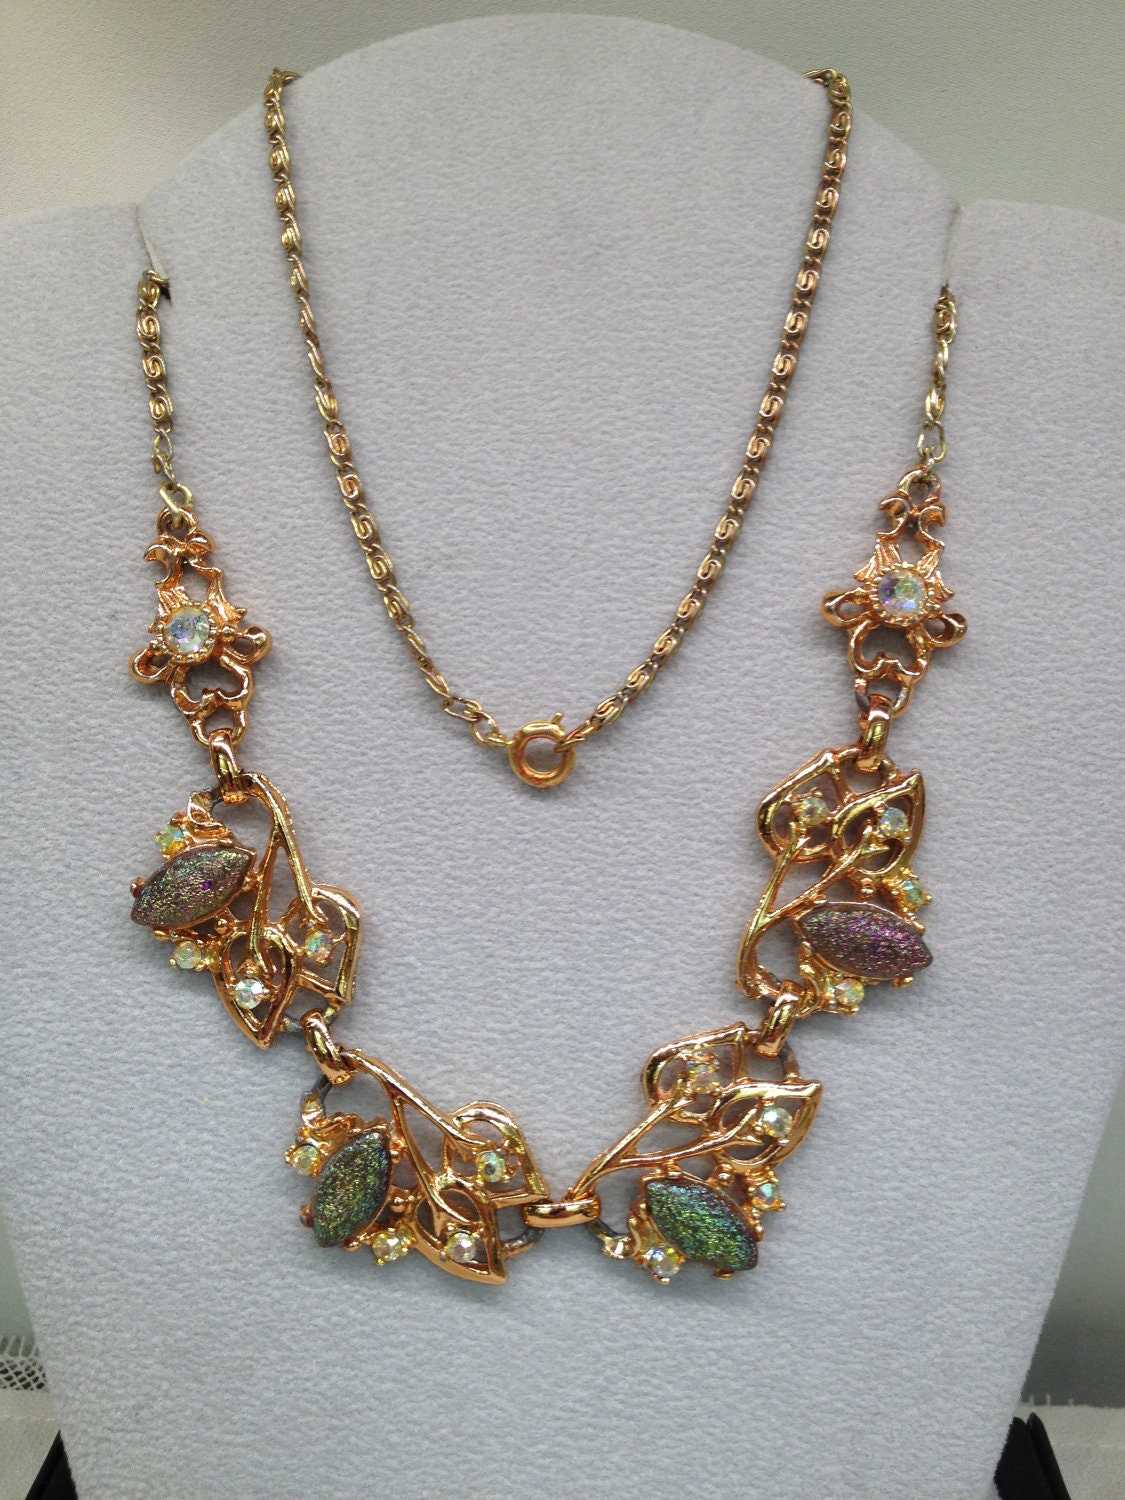 1950's Art Deco Hollywood Regency Necklace Rose Gold Tone Crystal and Carnival Art Glass